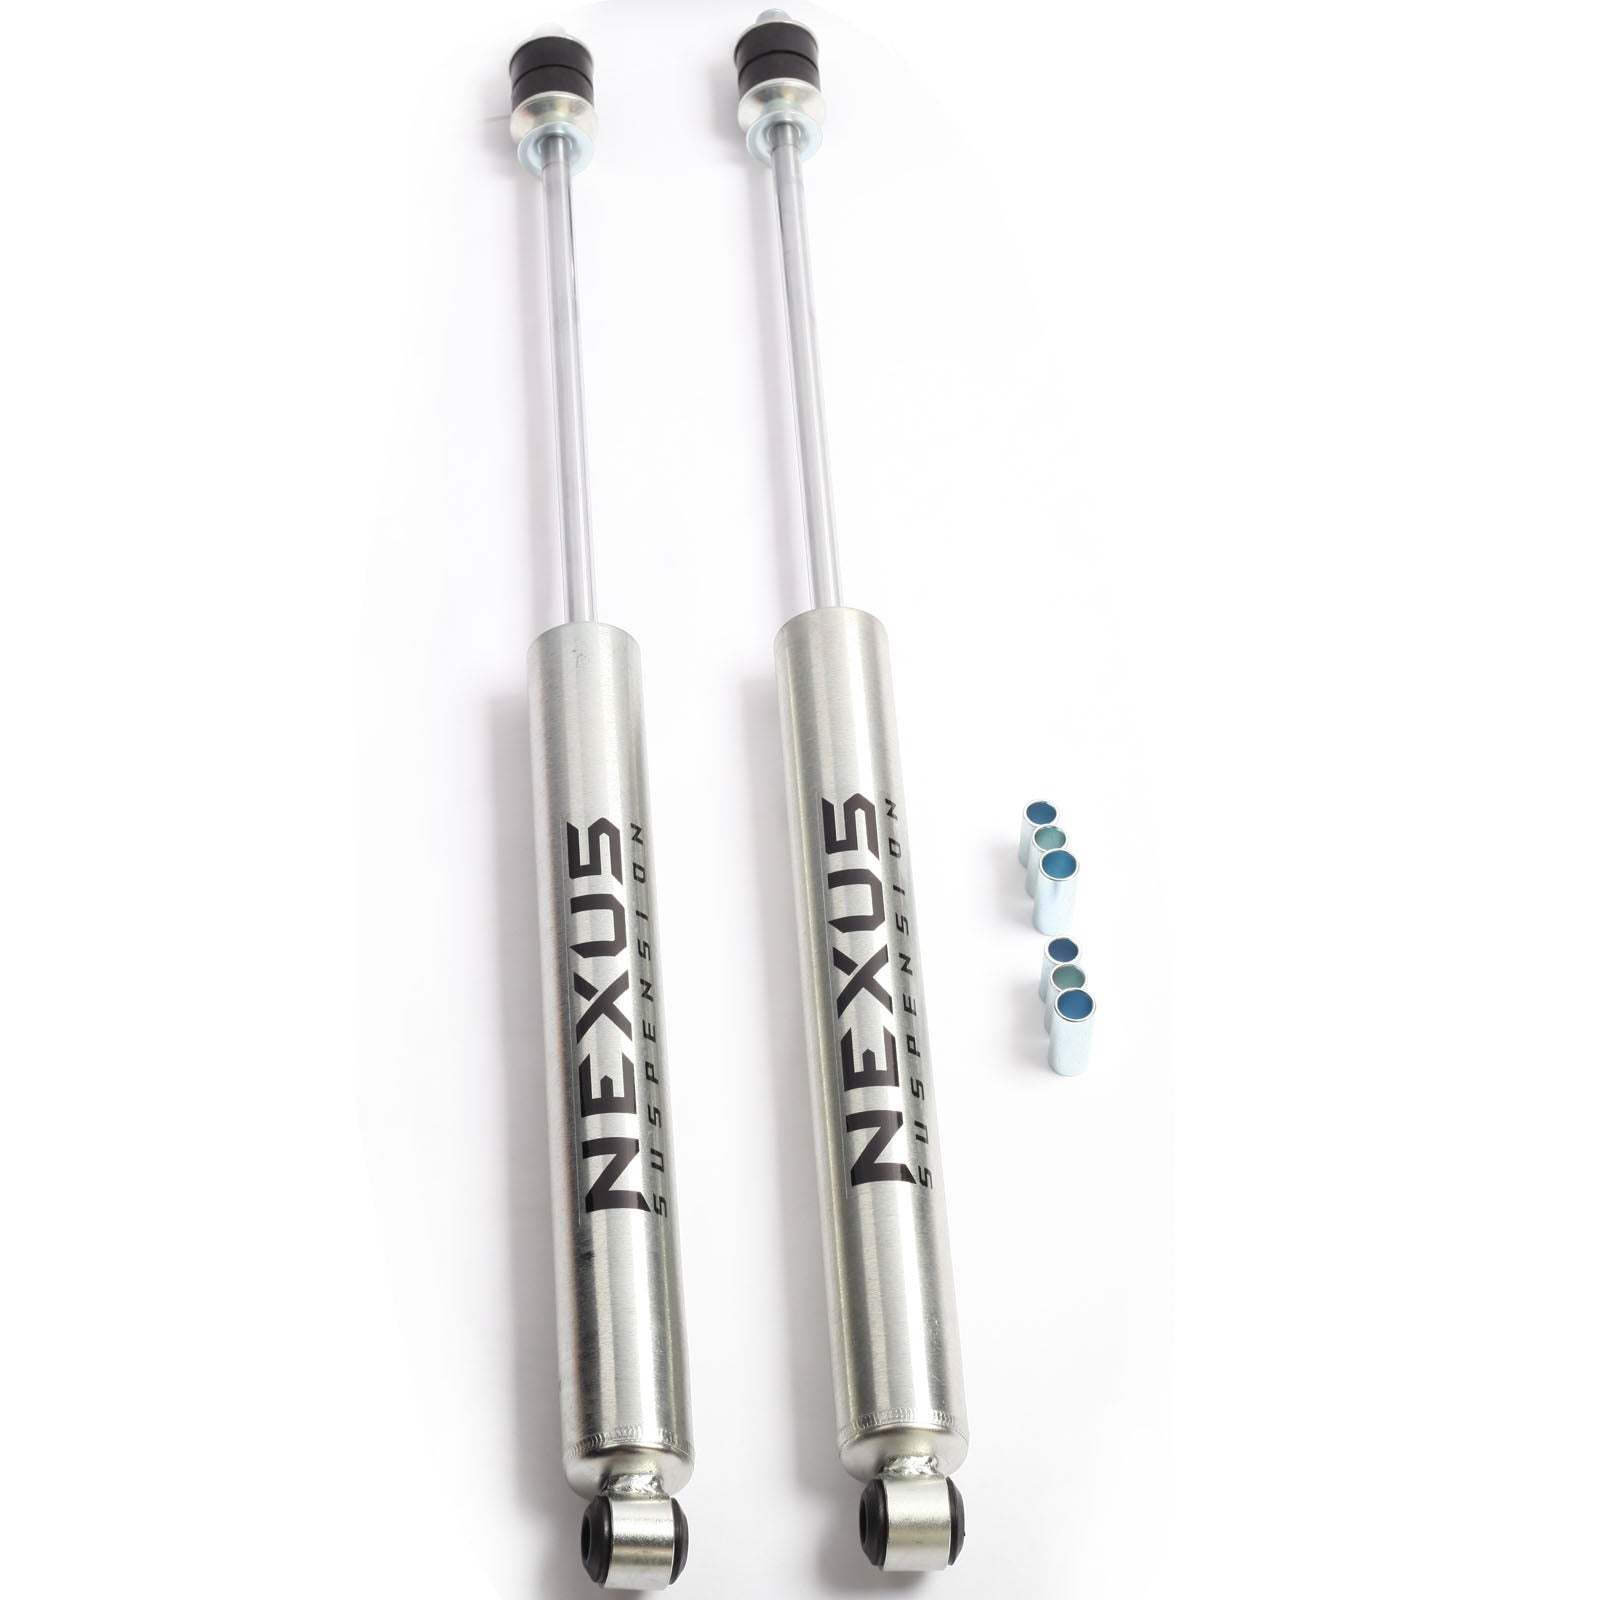 NEXUS SUSPENSION 4.5 Inch Lift Front Shock Absorber for Dodge Ram 2500 Ram 3500 1994-2002,Zinc Plated Coating,Pair Pack